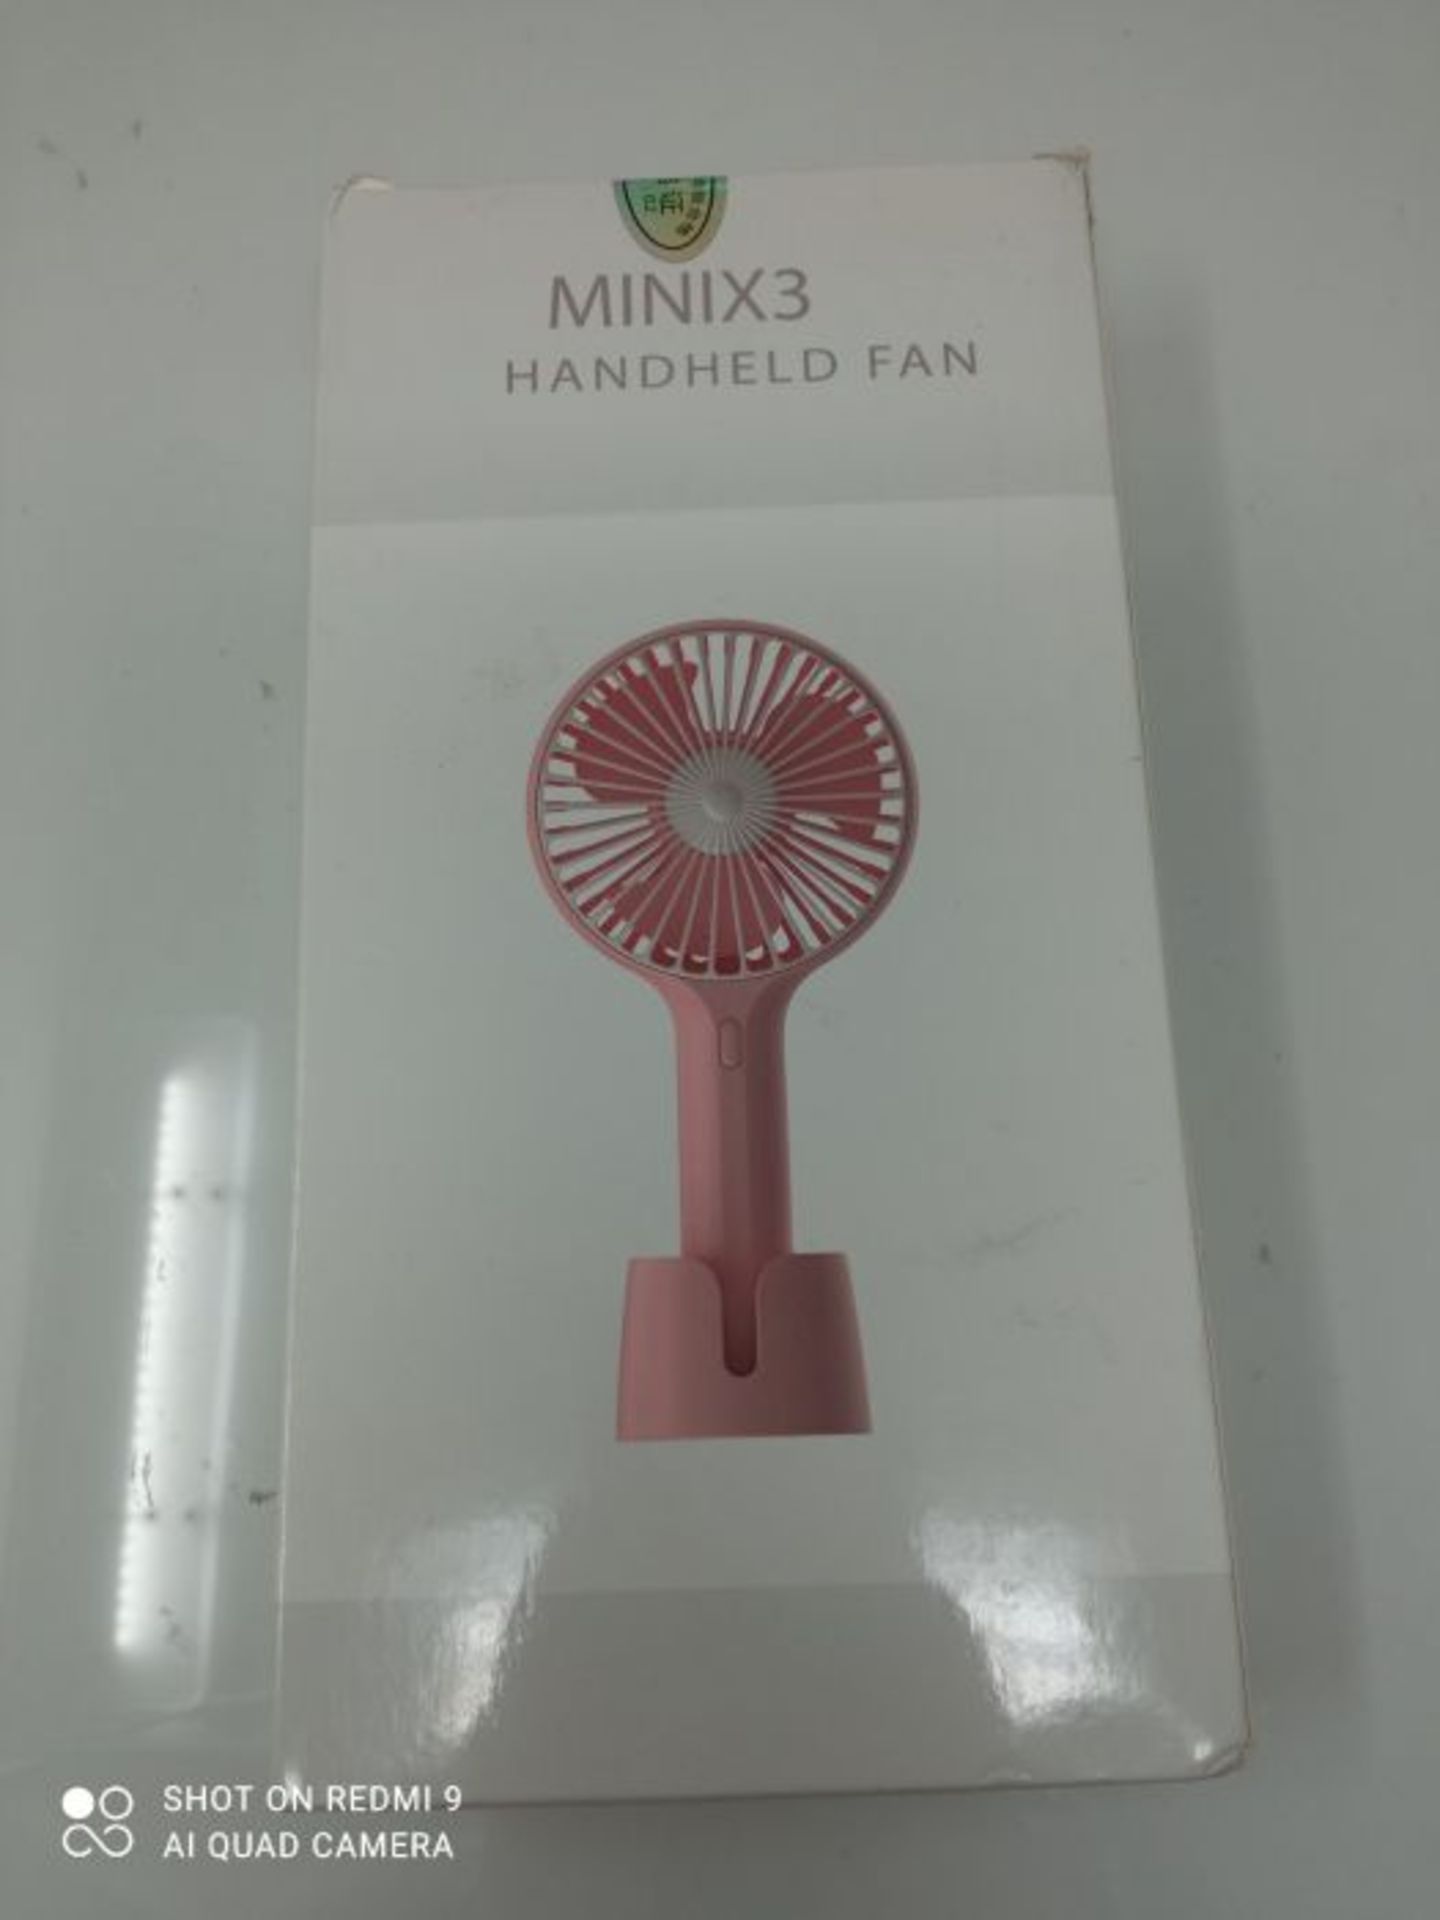 geek cook Fan Cooler,USB handheld small fan mini portable charging new pocket student - Image 2 of 3